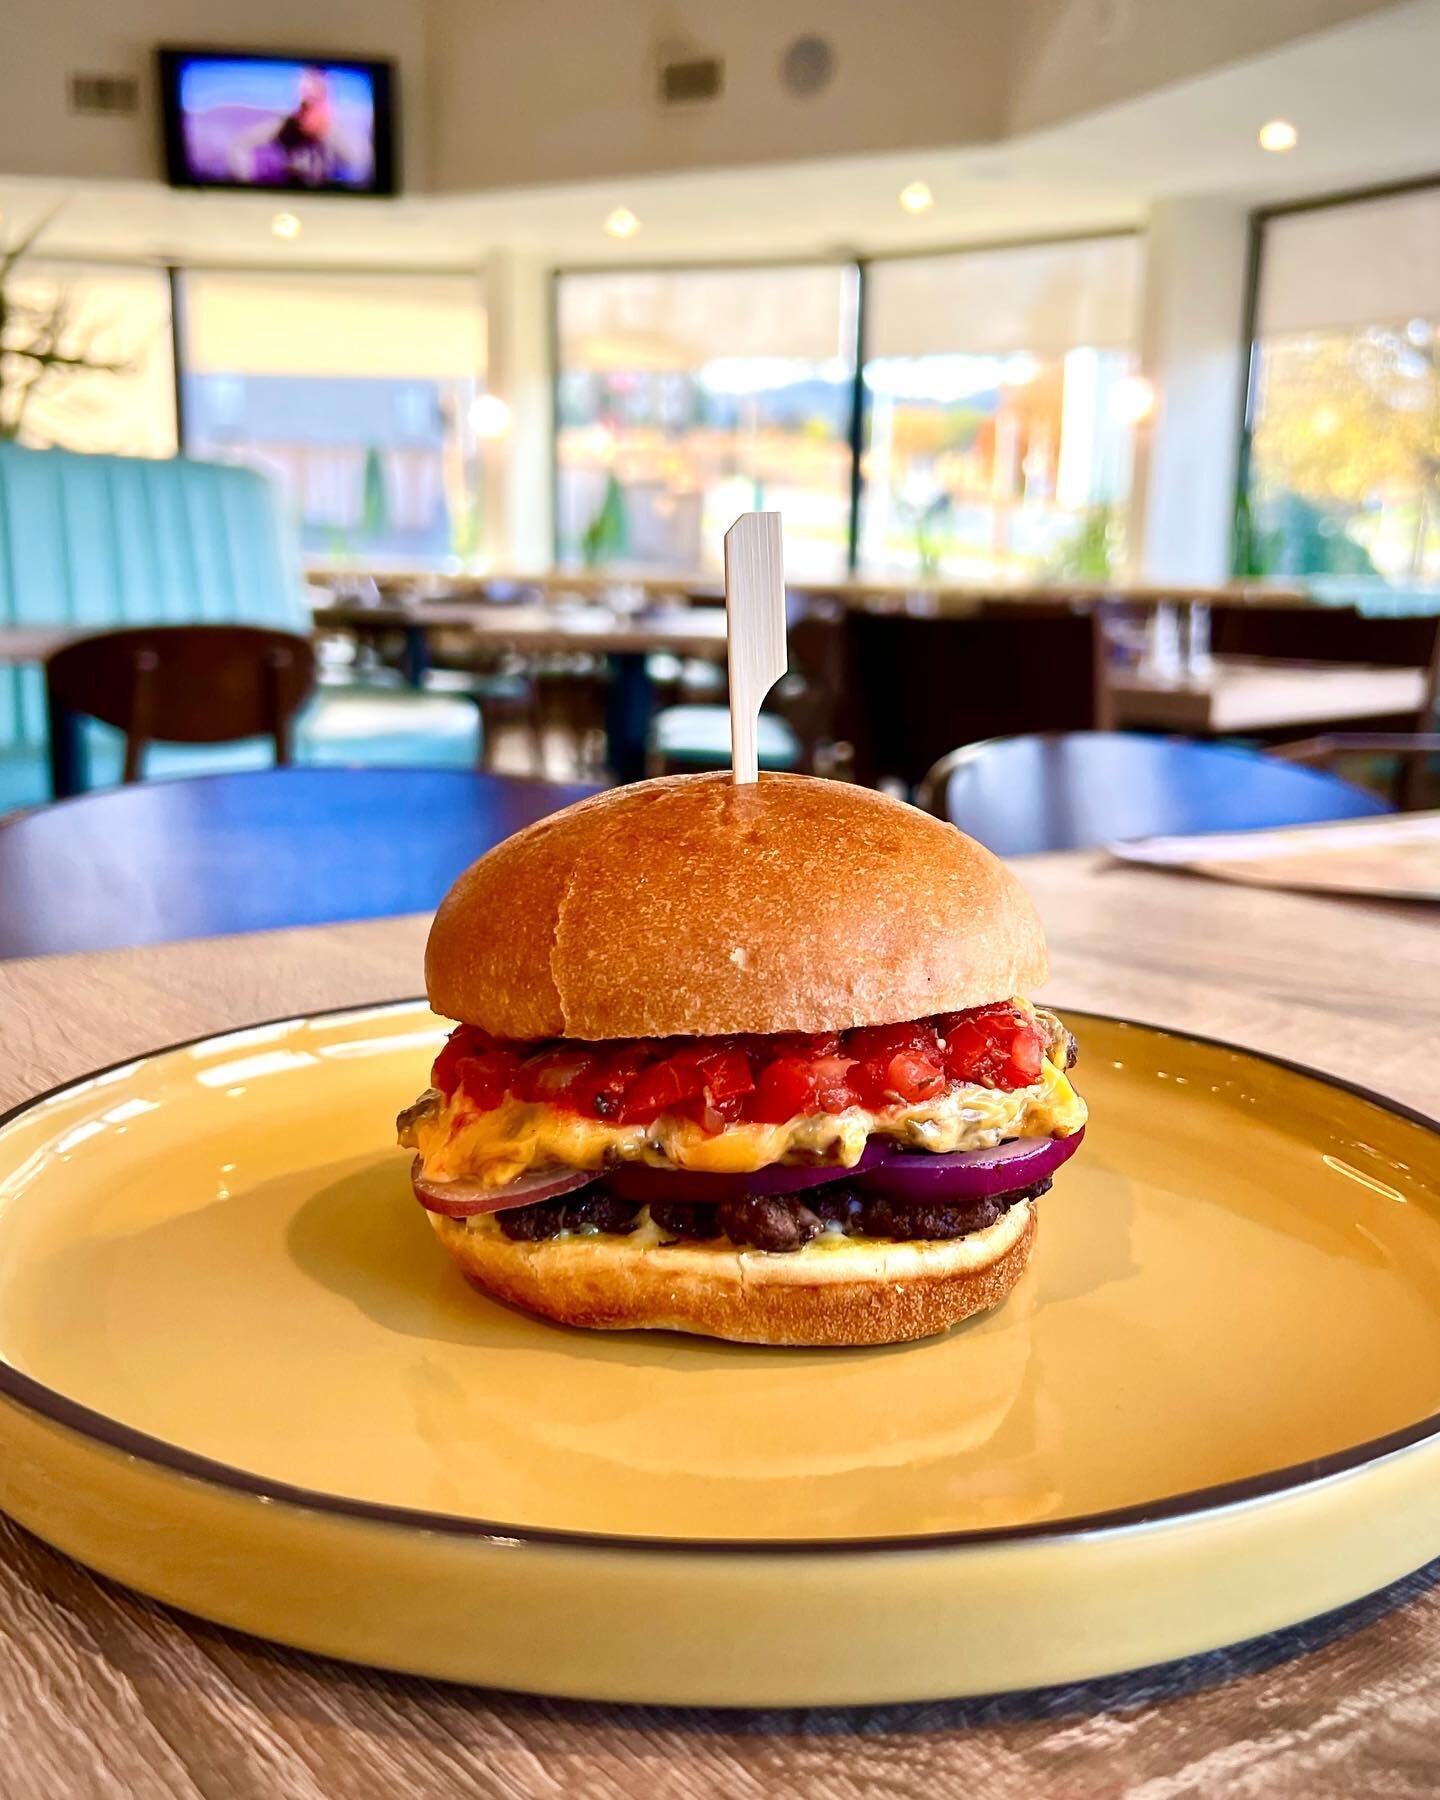 BURGER DROP THURSDAY! 🍔🤩

Every Thursday we&rsquo;re grillin&rsquo; the baddest patties in town. 

This month&rsquo;s special is the double cheese burger with red onion, mustard mayo, american cheese and tomato relish. Packed with flavour and serve